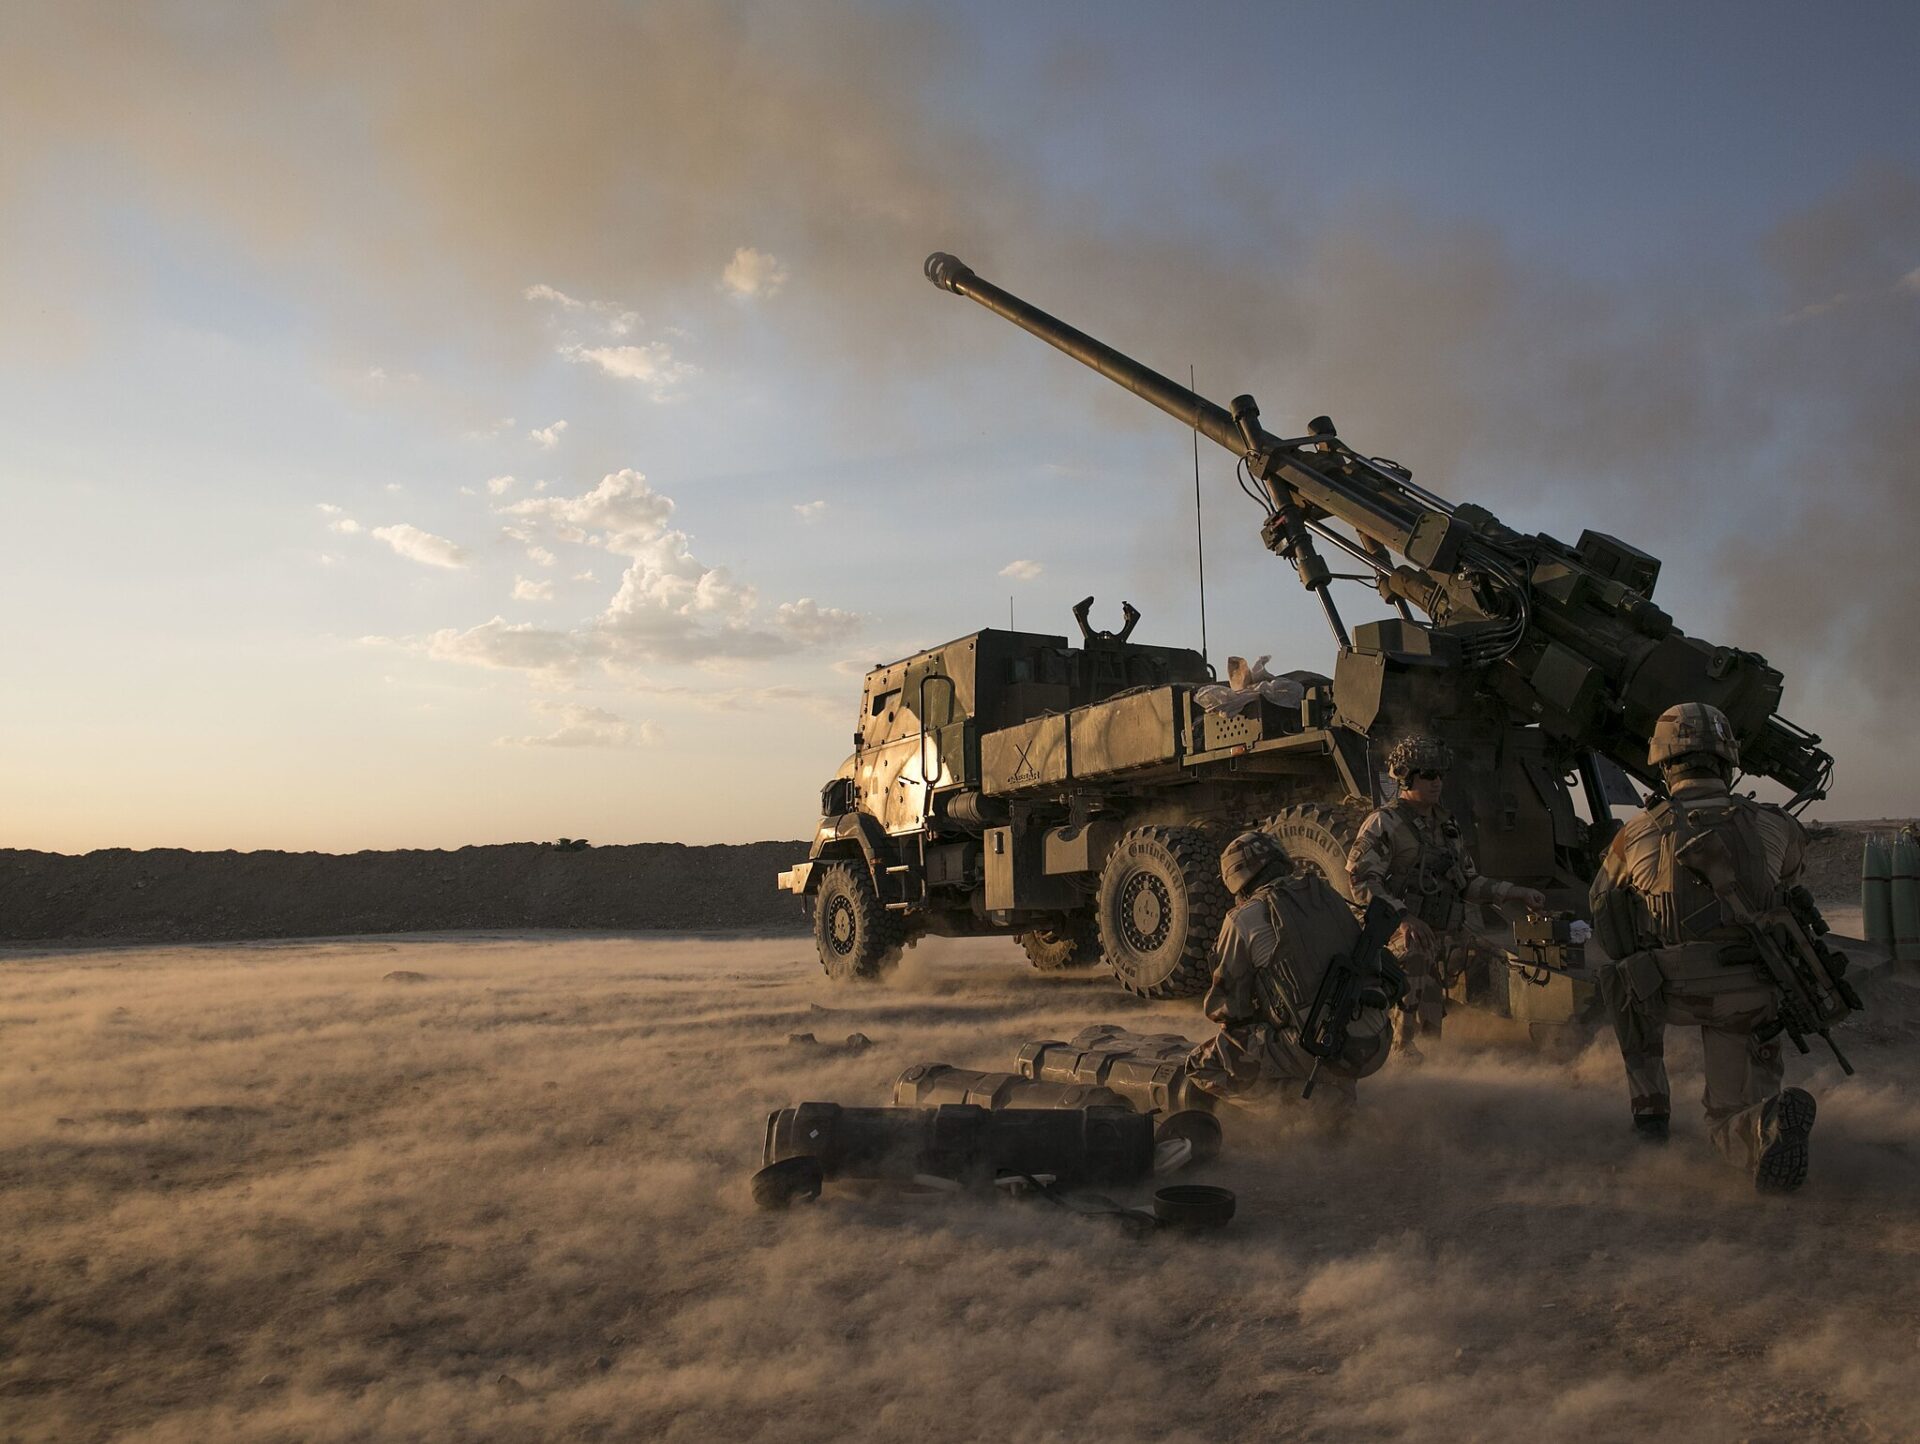 A French commander with Task Force Wagram, fires his 1,000th round from French Caesar in support of Operation Roundup in Al Quim, Iraq, May 16, 2018. As a non-permanent force the Coalition aims to enable the Iraqi security forces to be self-sufficient. (U.S. Army photo by Spc. Zakia Gray)